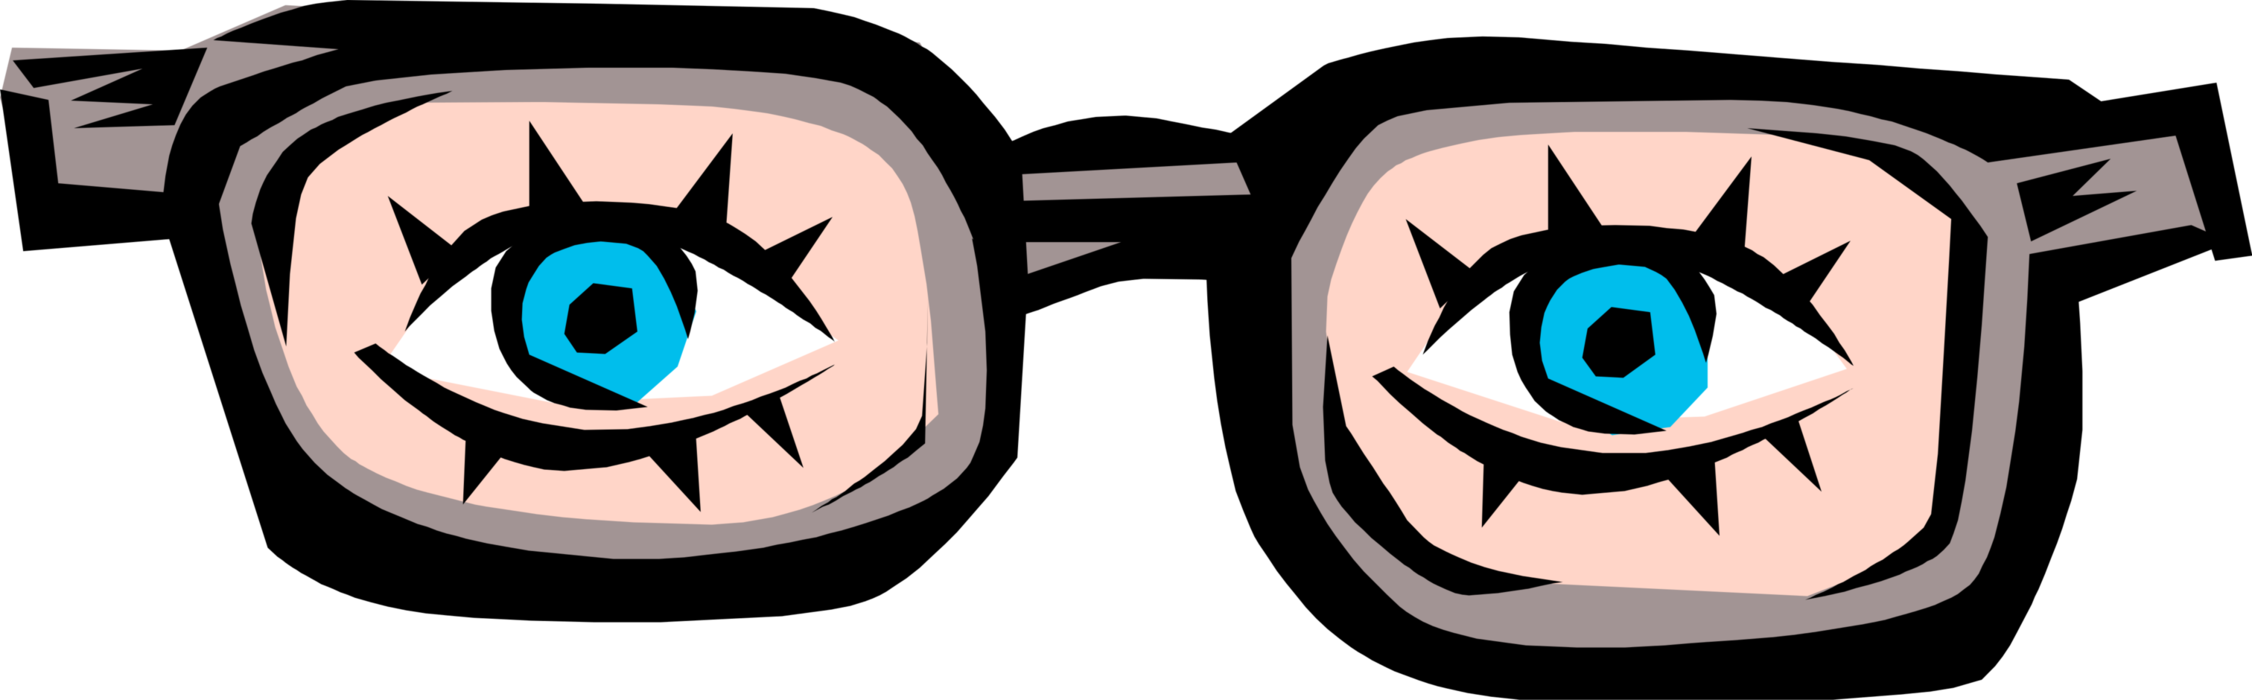 Vector Illustration of Joke Glasses Disguise with Funny Eyes